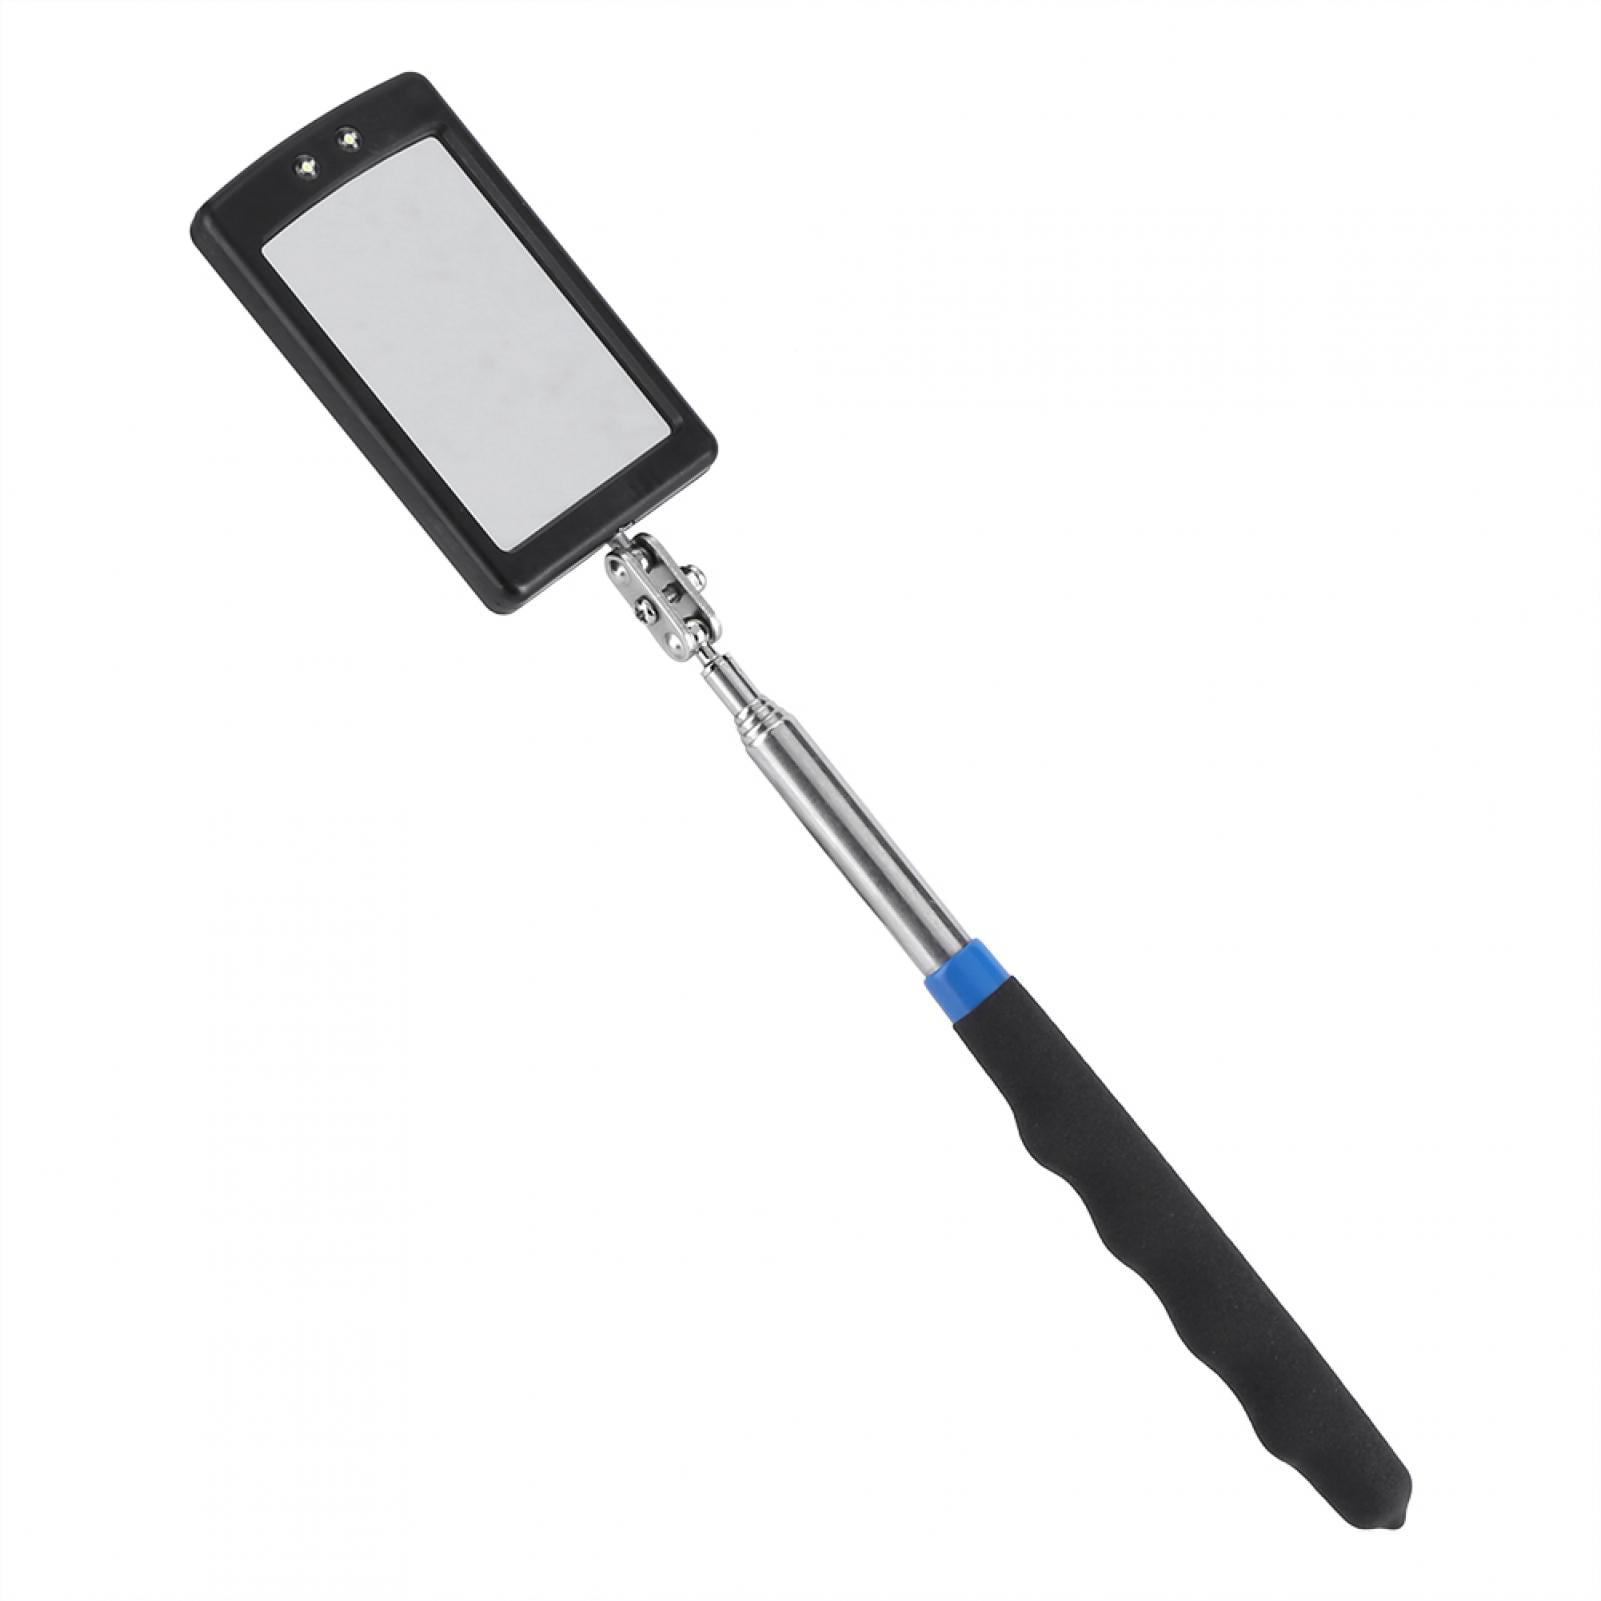 Telescopic Inspection Mirror,LED Telescopic Mirror with 2 Bright LED Light,Expandable Non-Slip Soft Cushion Grip,Car Inspection Tool As Pictures Show 